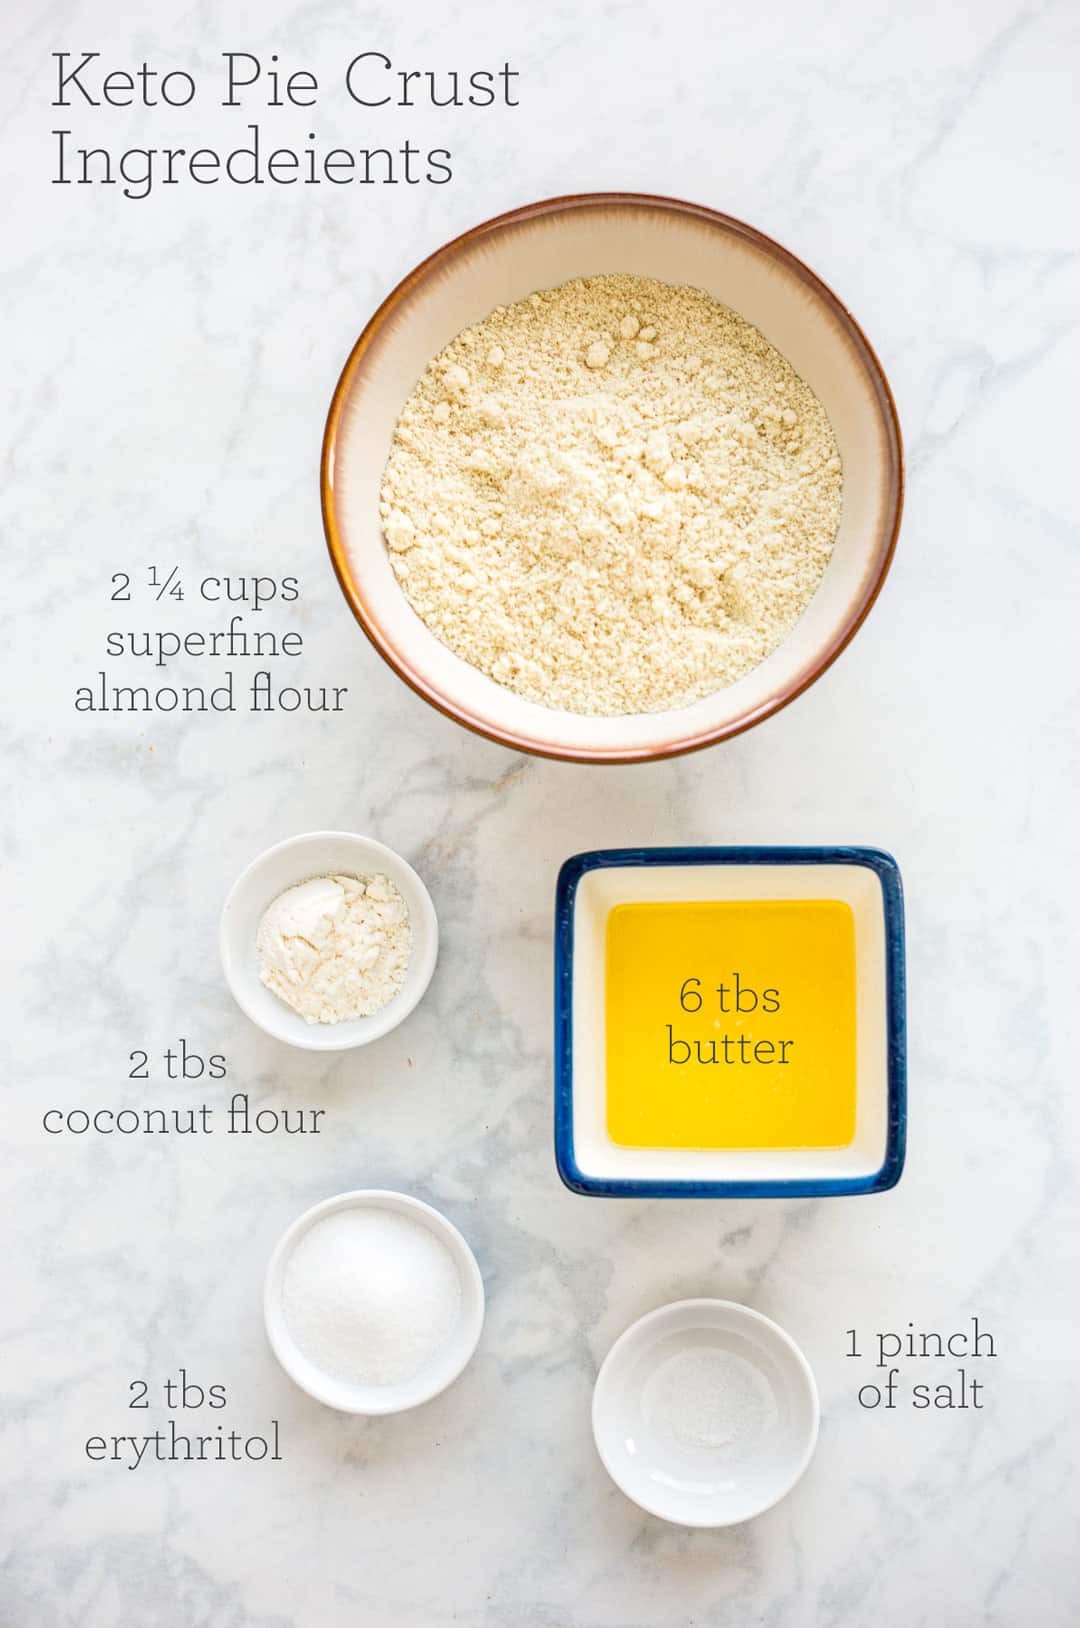 Image of ingredients for Keto Pie Crust with text overlay of ingredients amounts